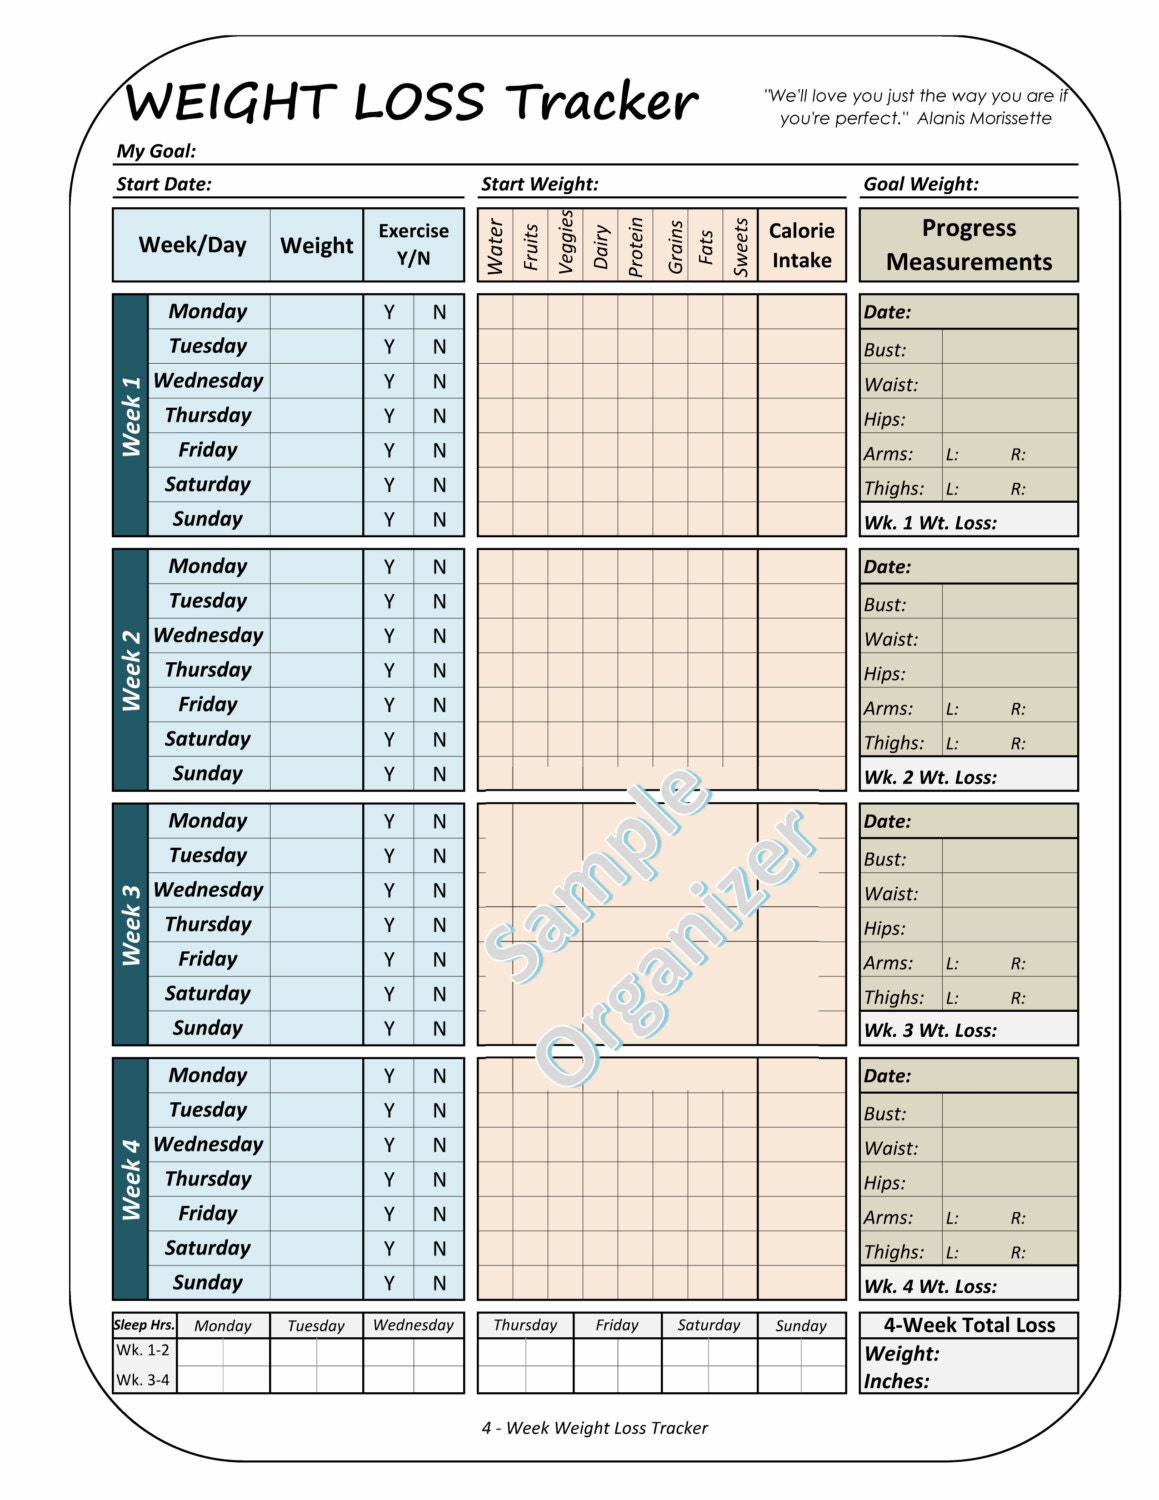 weight-loss-tracker-printable-weight-loss-planner-4-week